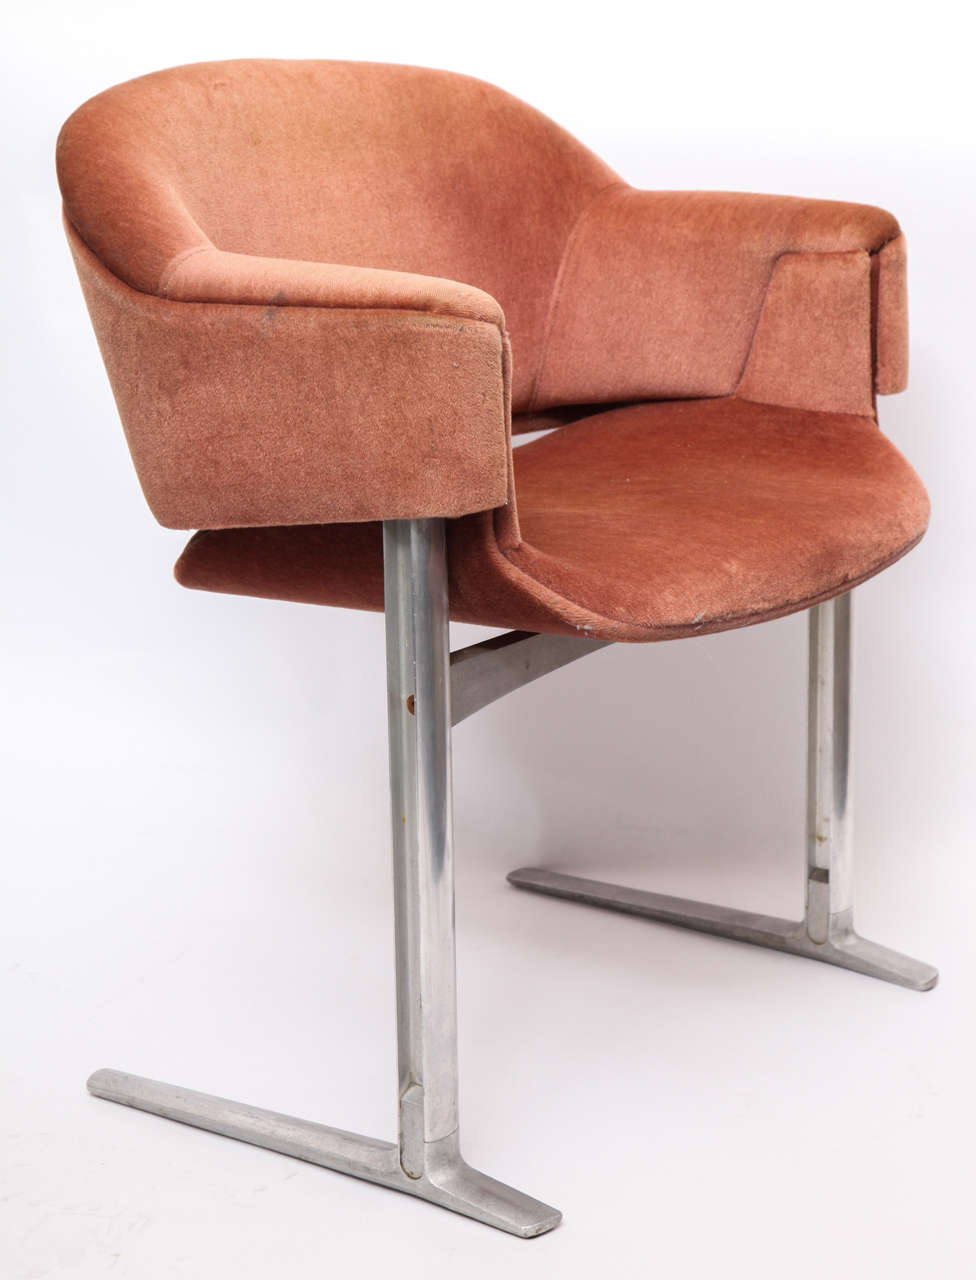 A Pair of 1969 Modernist Chairs from QE2 Race Line by Robert Heritage